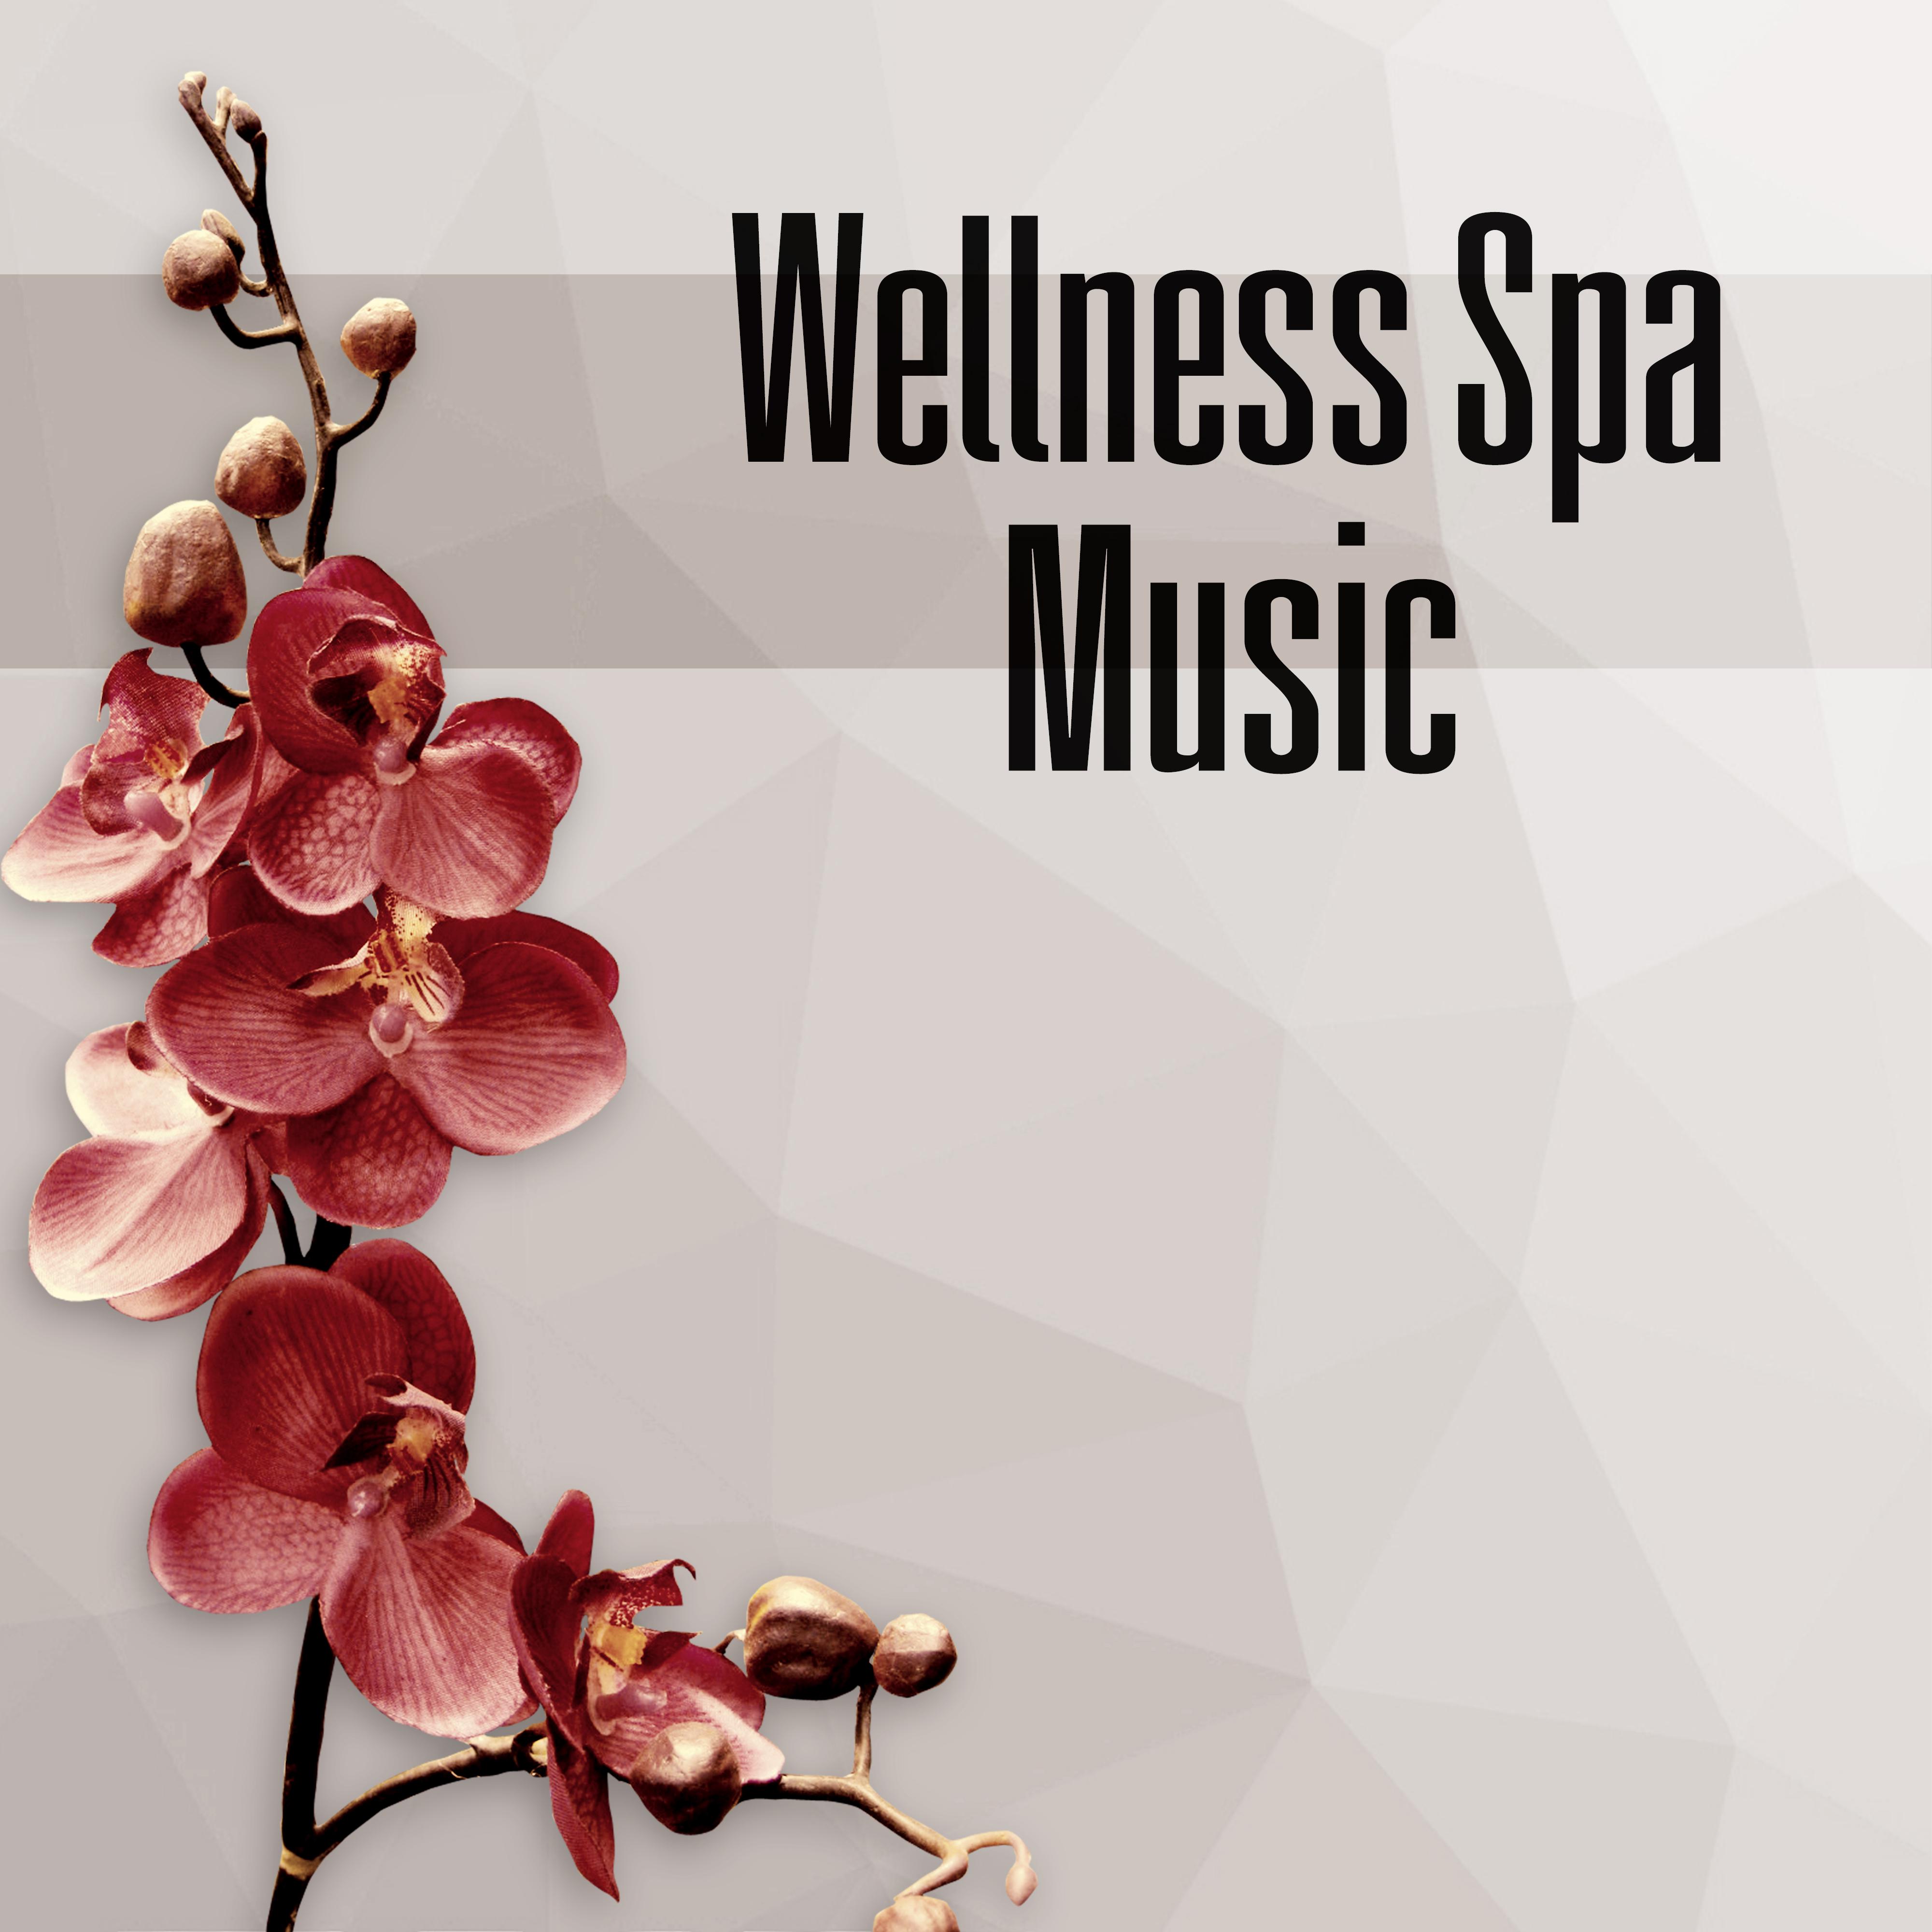 Wellness Spa Music – Beauty Spa, Nature Sounds, Serenity Spa, Wellness, Relaxation Meditation, Inner Silence, Soothing Sounds, Massage